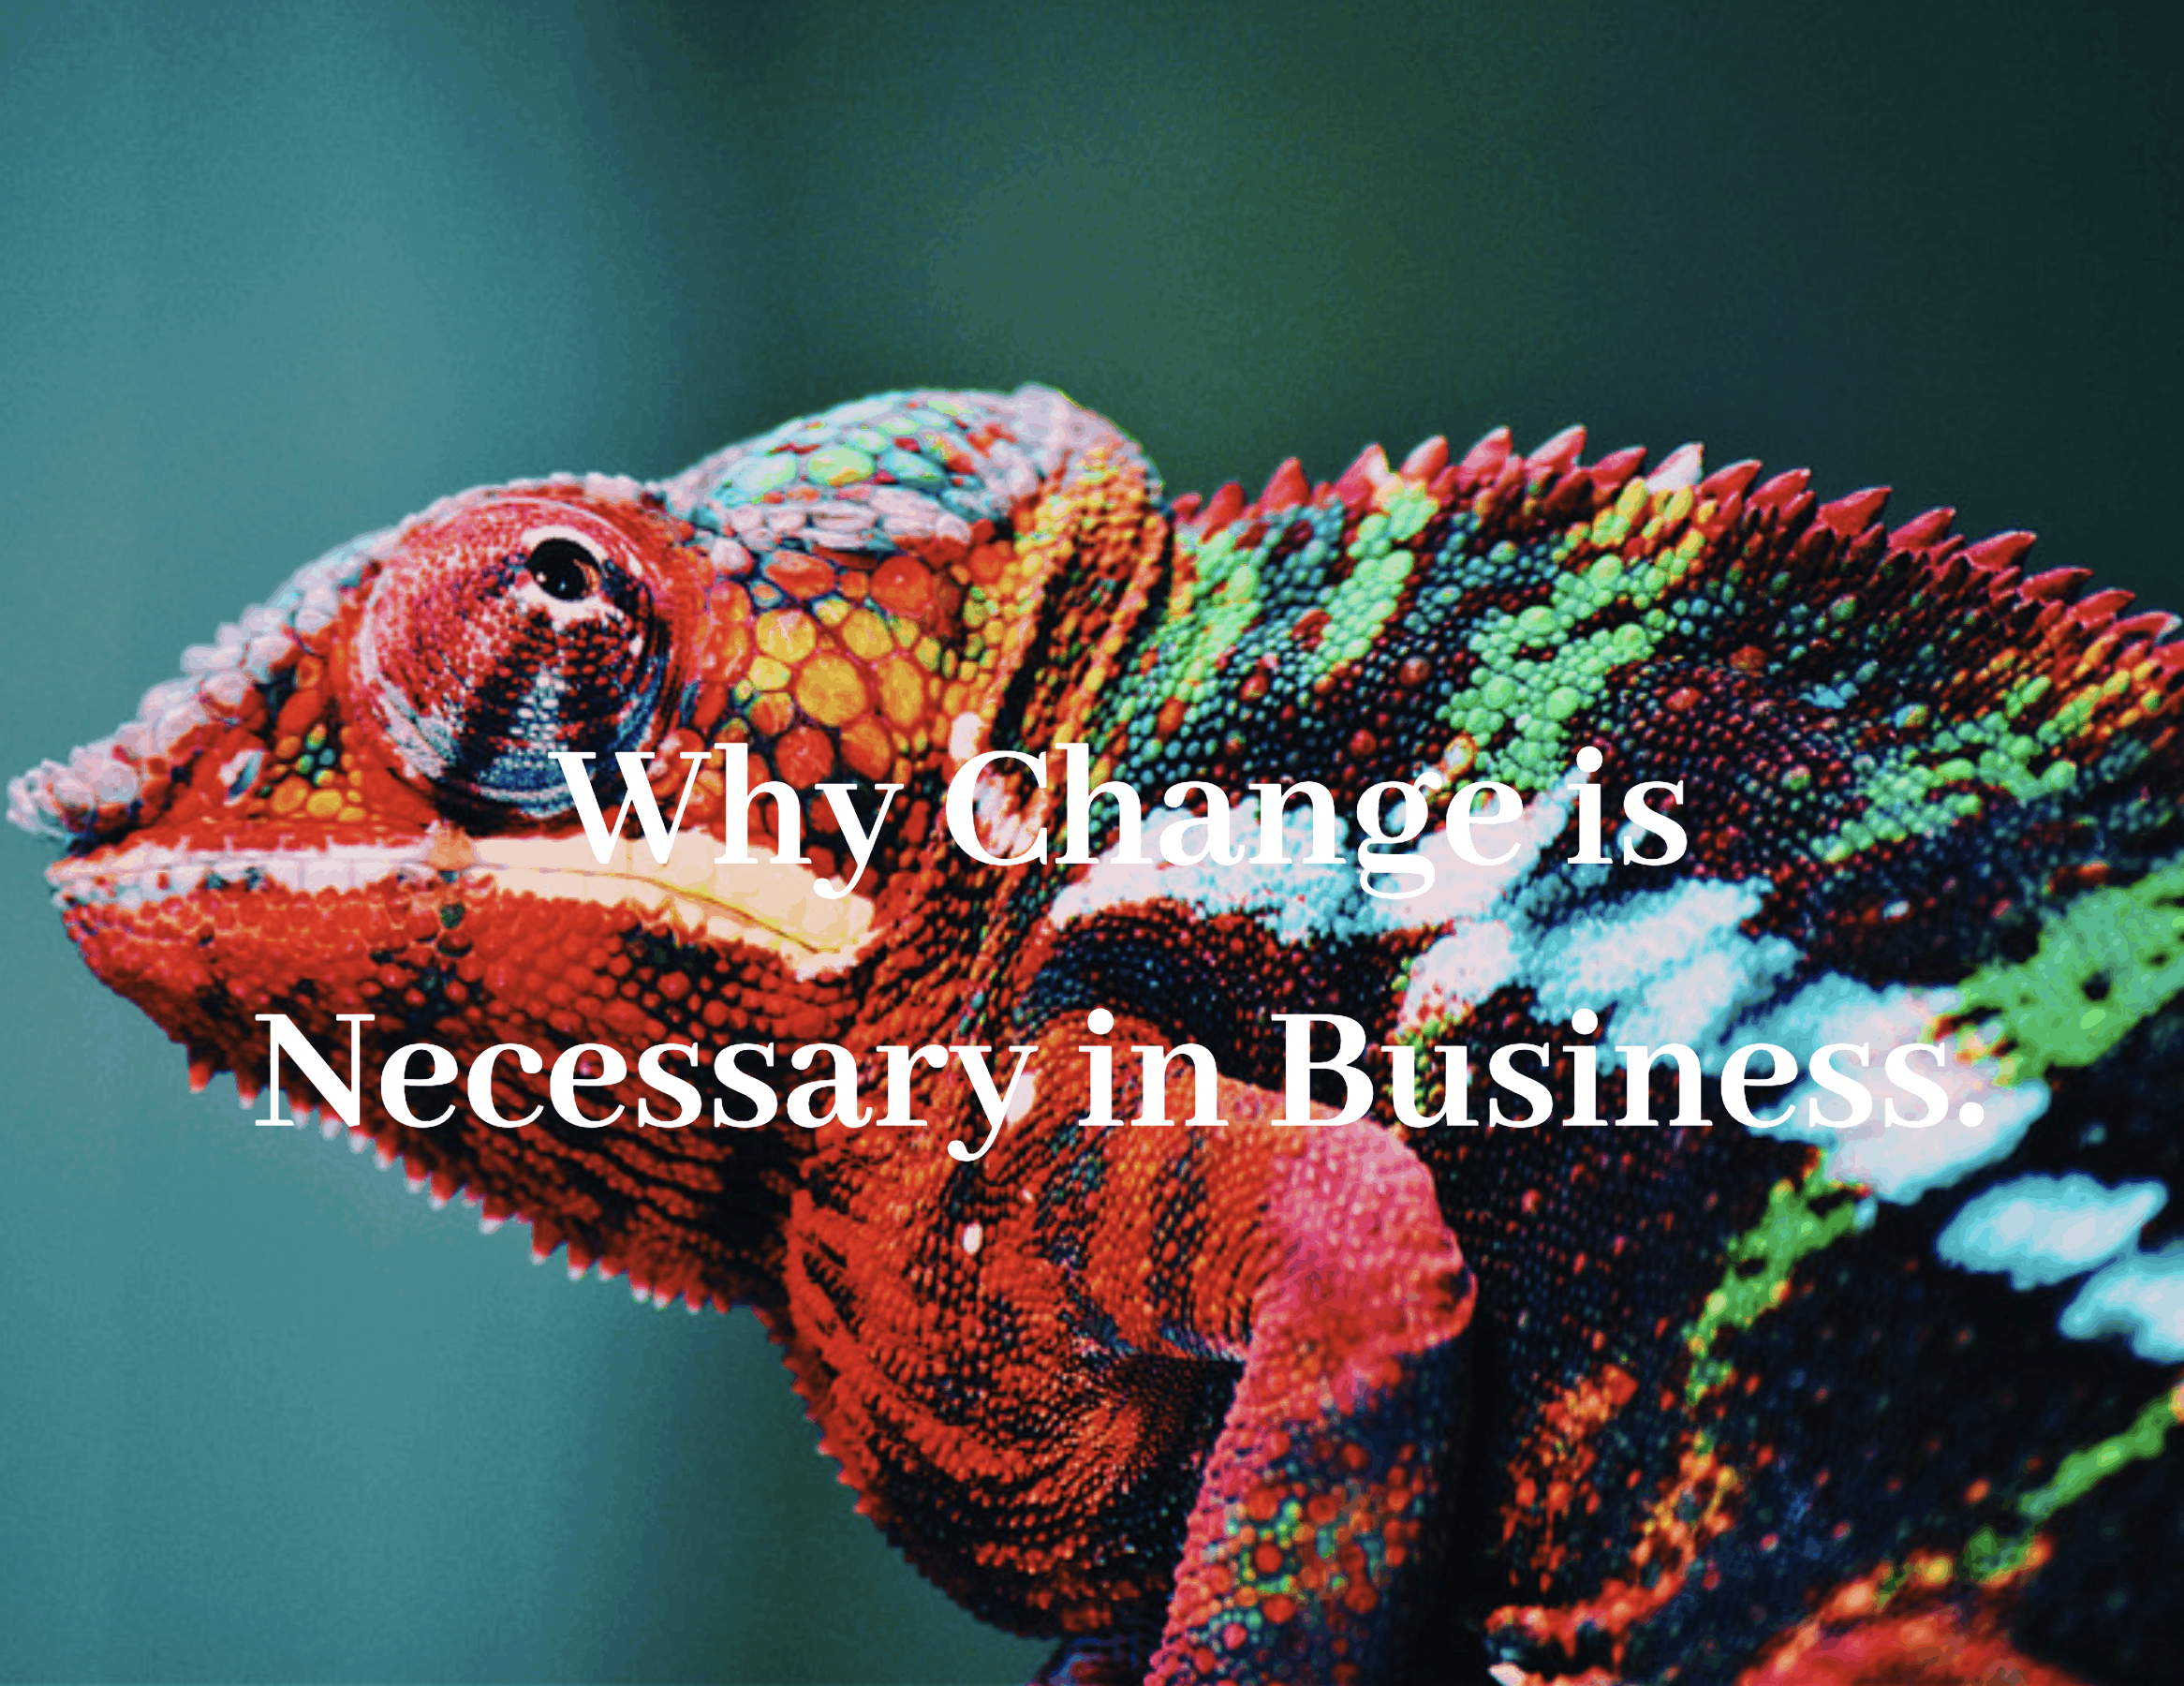 Cameleon that changes color, change is very important in business.